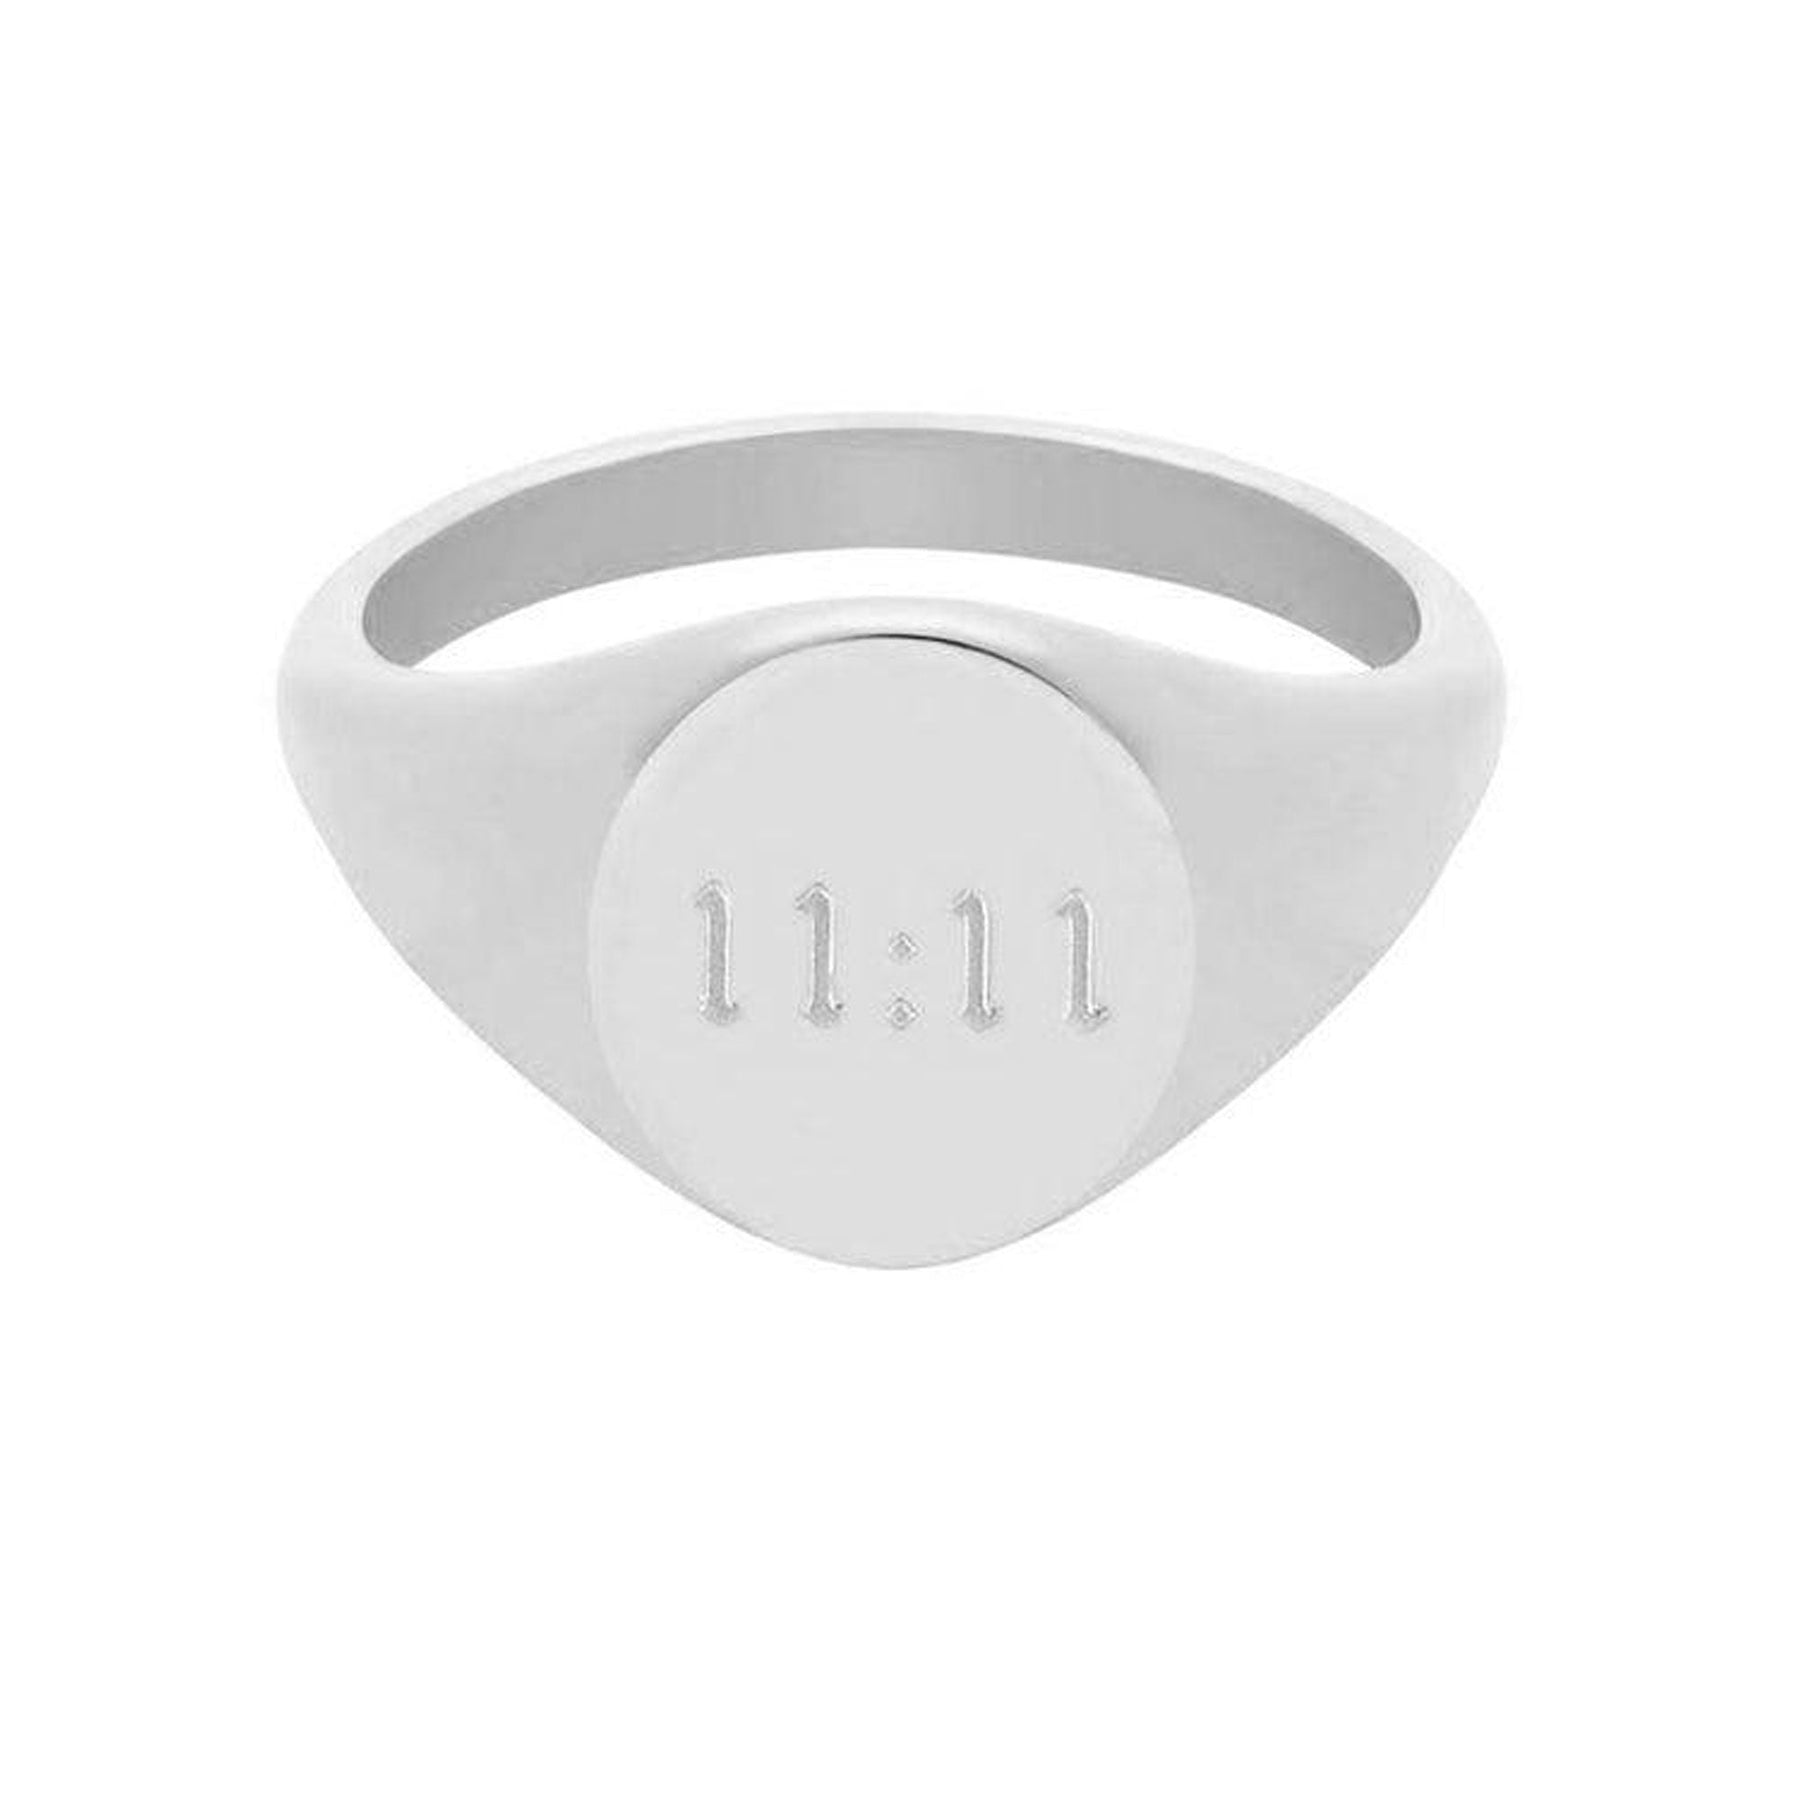 BohoMoon Stainless Steel 11:11 Signet Ring Silver / US 6 / UK L / EUR 51 (small)